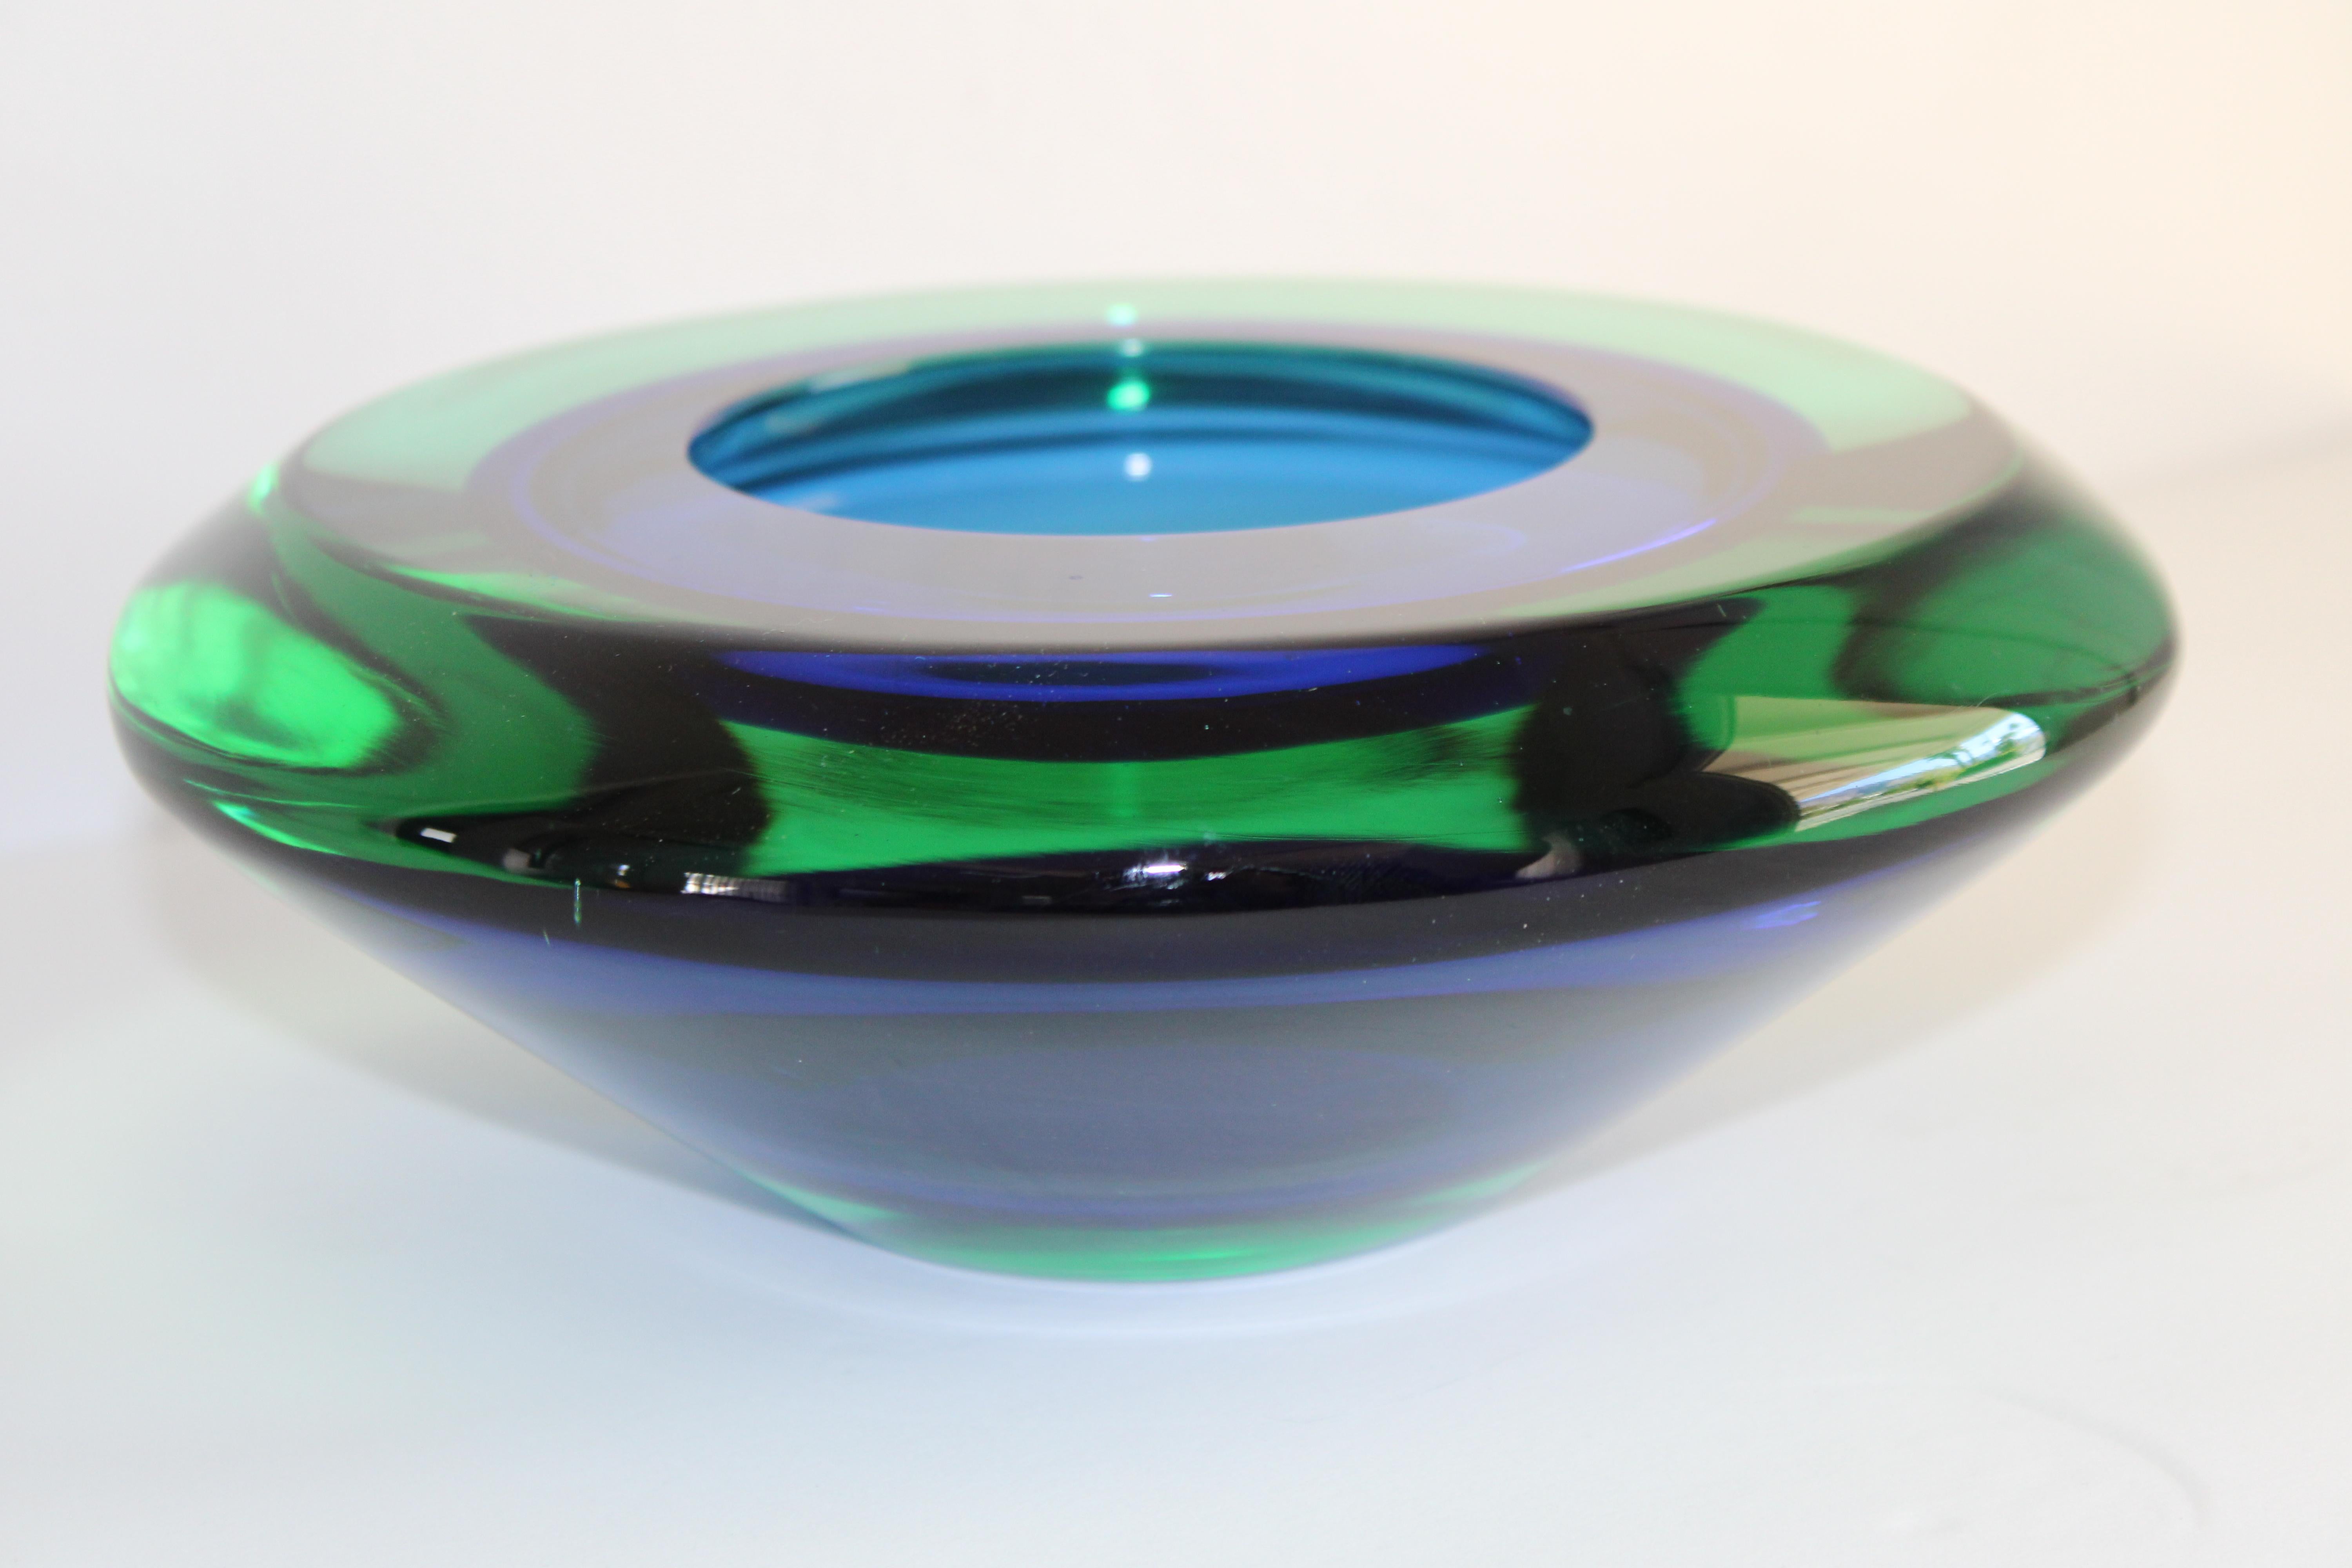 Murano geode bowl by Cenedese. Vibrant colors of blue and green. Bowl measures 3